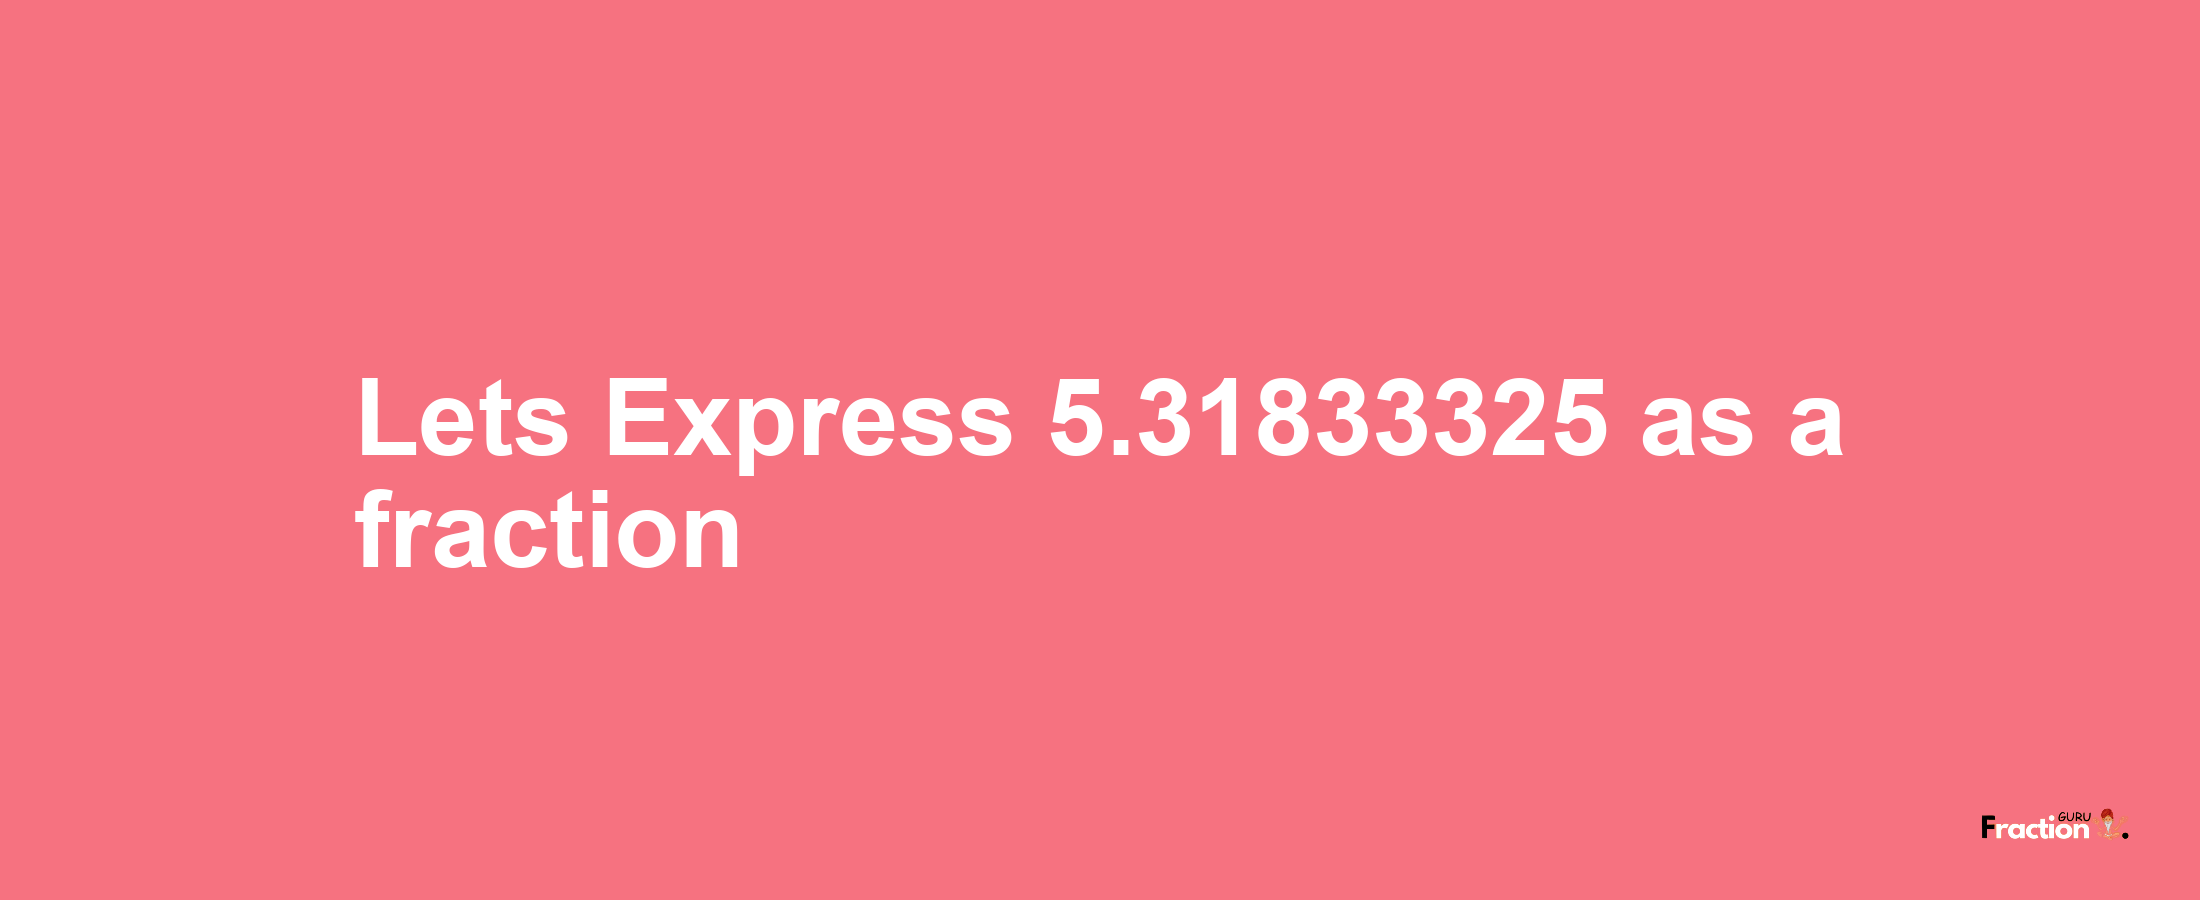 Lets Express 5.31833325 as afraction